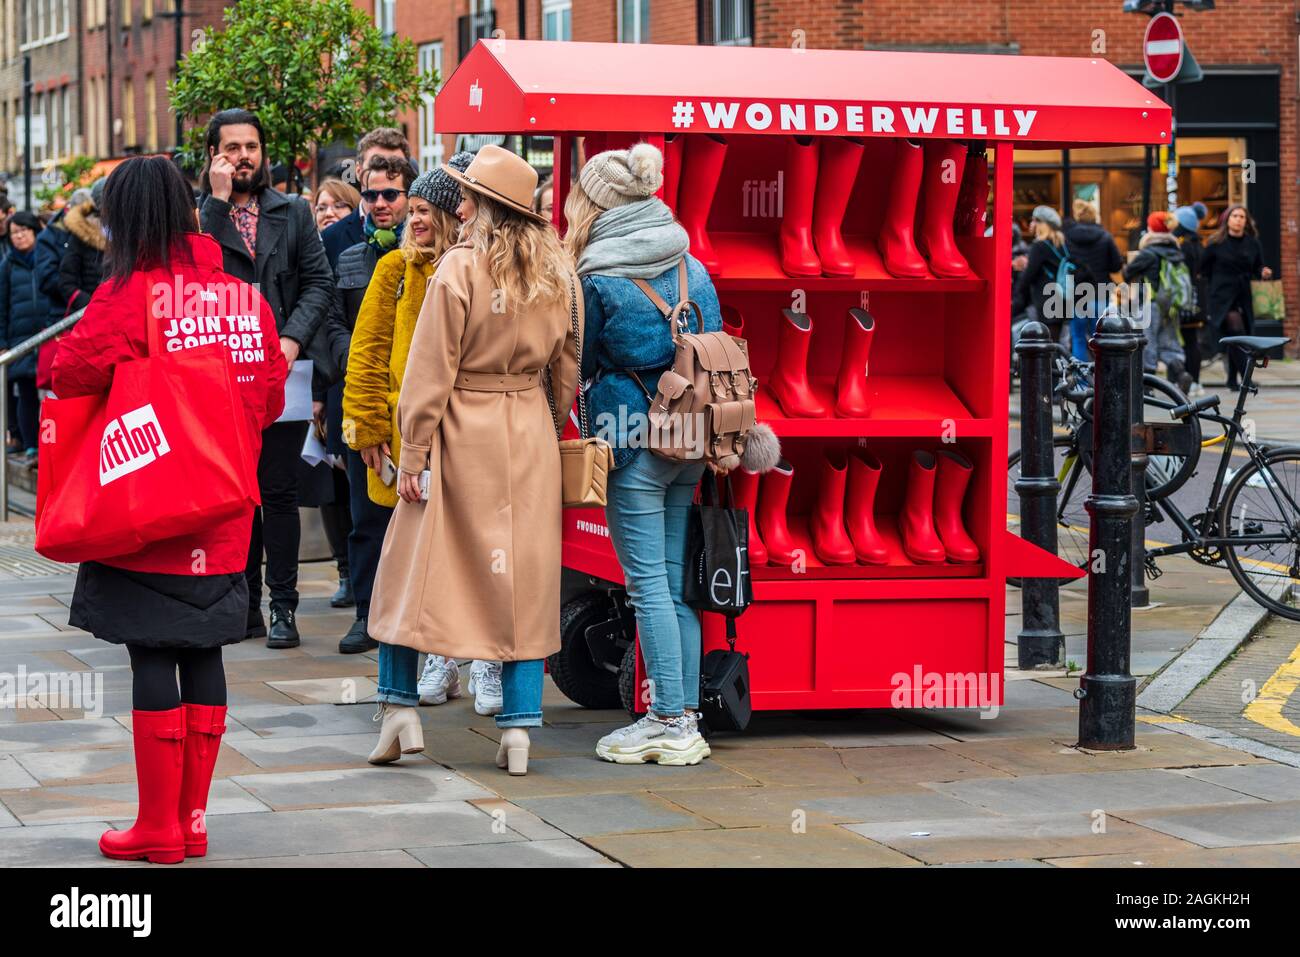 Fitflop's Wonderwelly promotion in London's Spitalfields Market. Wonderwelly is promoted as super comfortable wellington boots. Stock Photo